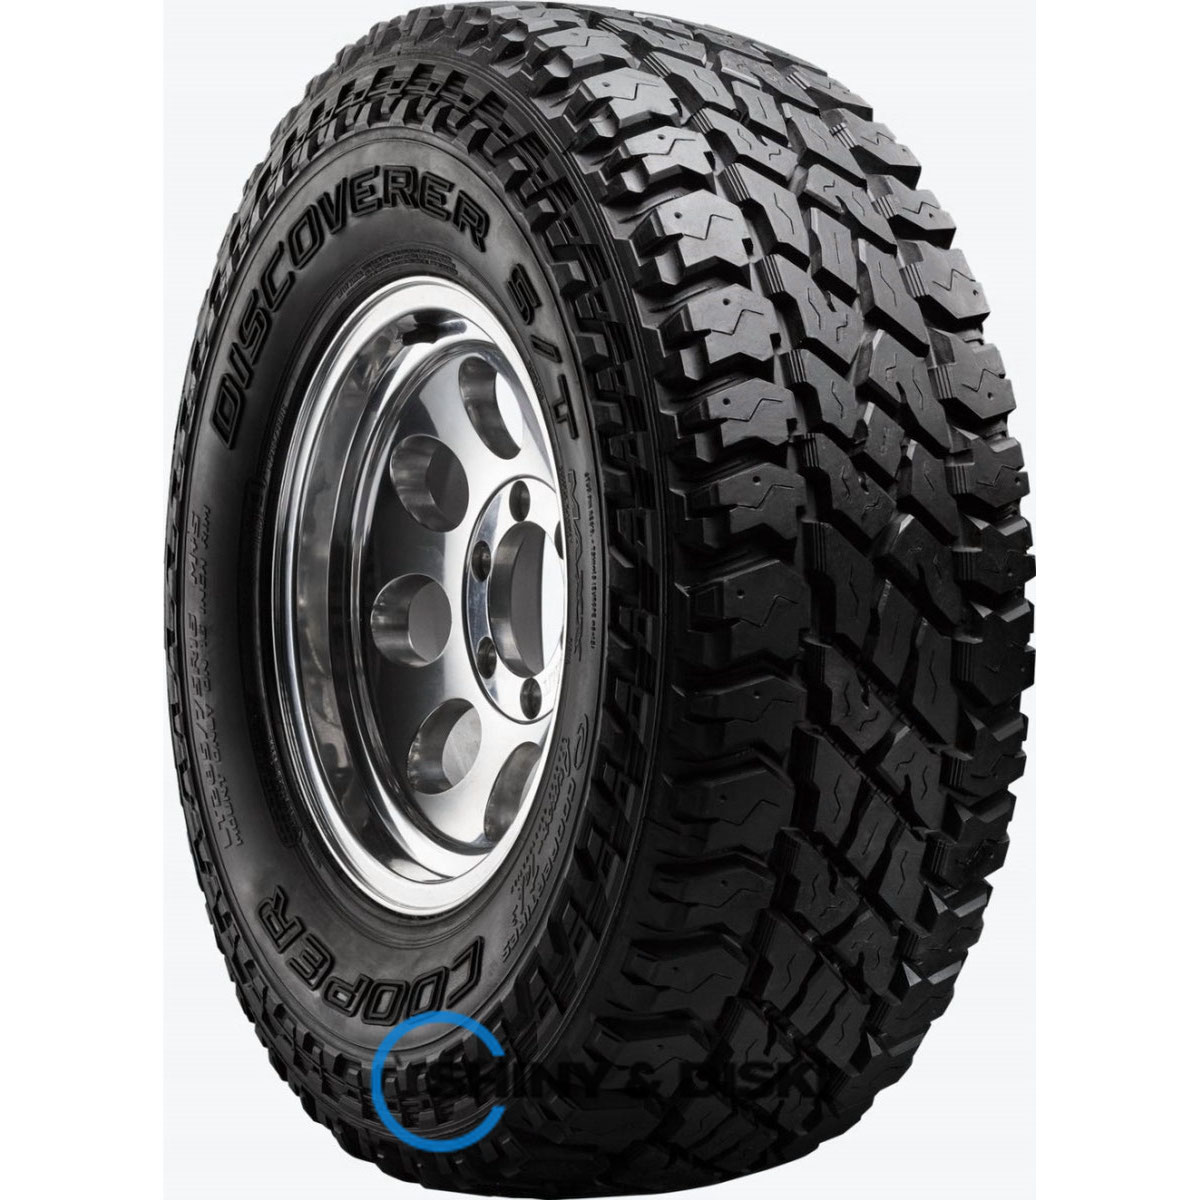 покрышки cooper discoverer s/t maxx 235/85 r16 120/116q